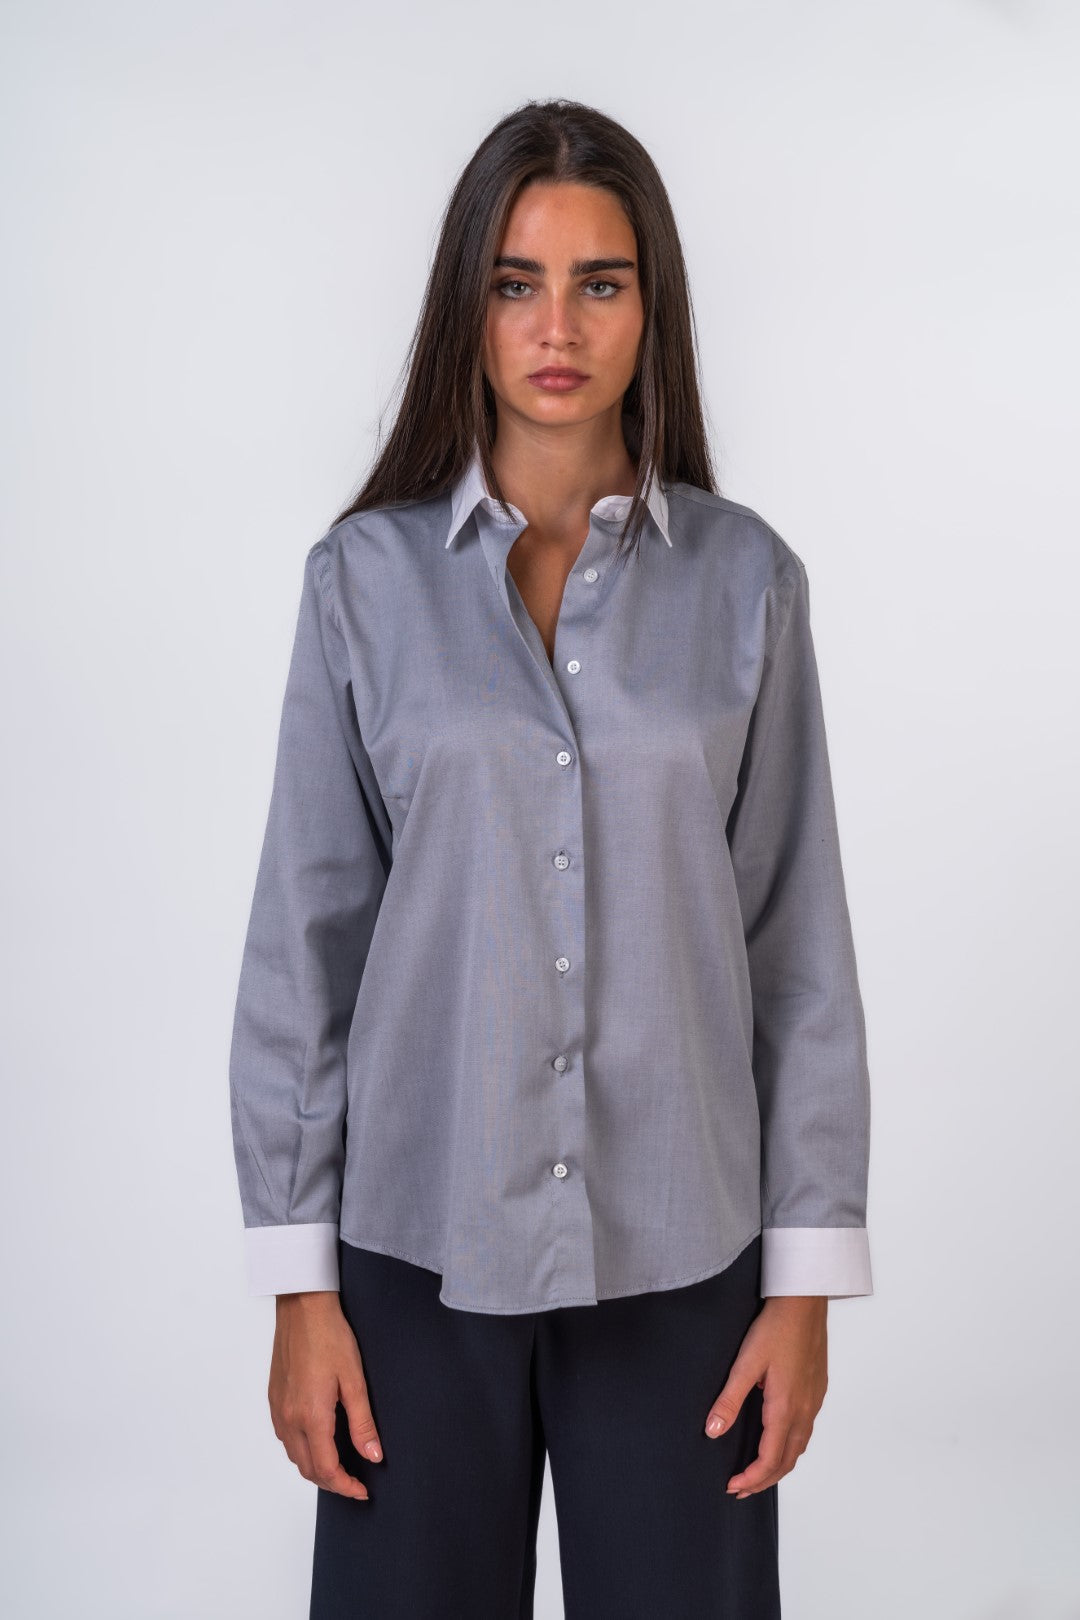 Button Up Shirt with White Collar